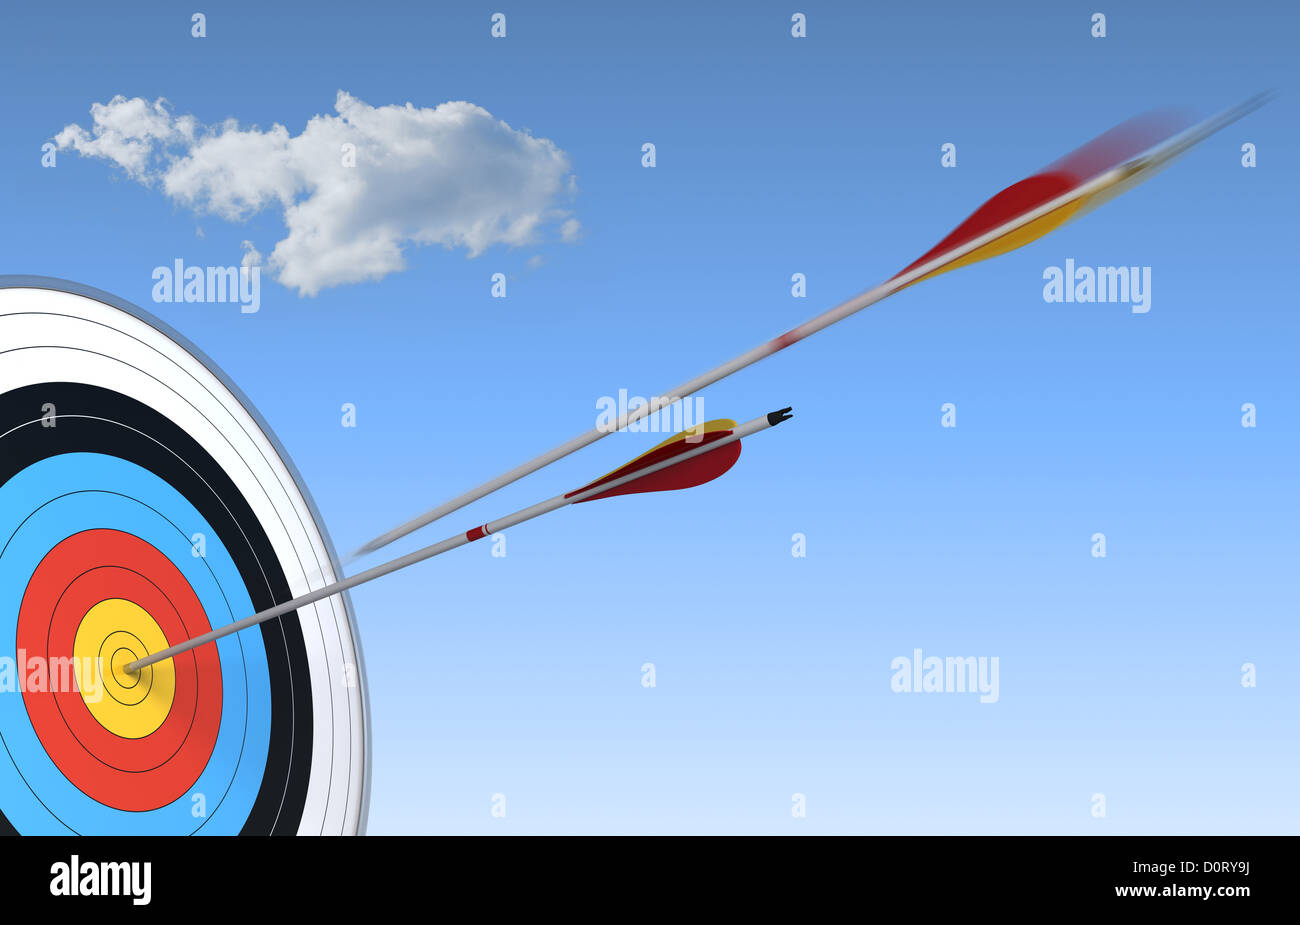 archery, target and arrow over blue sky background with one arrow in action and the other one who have reach the center Stock Photo